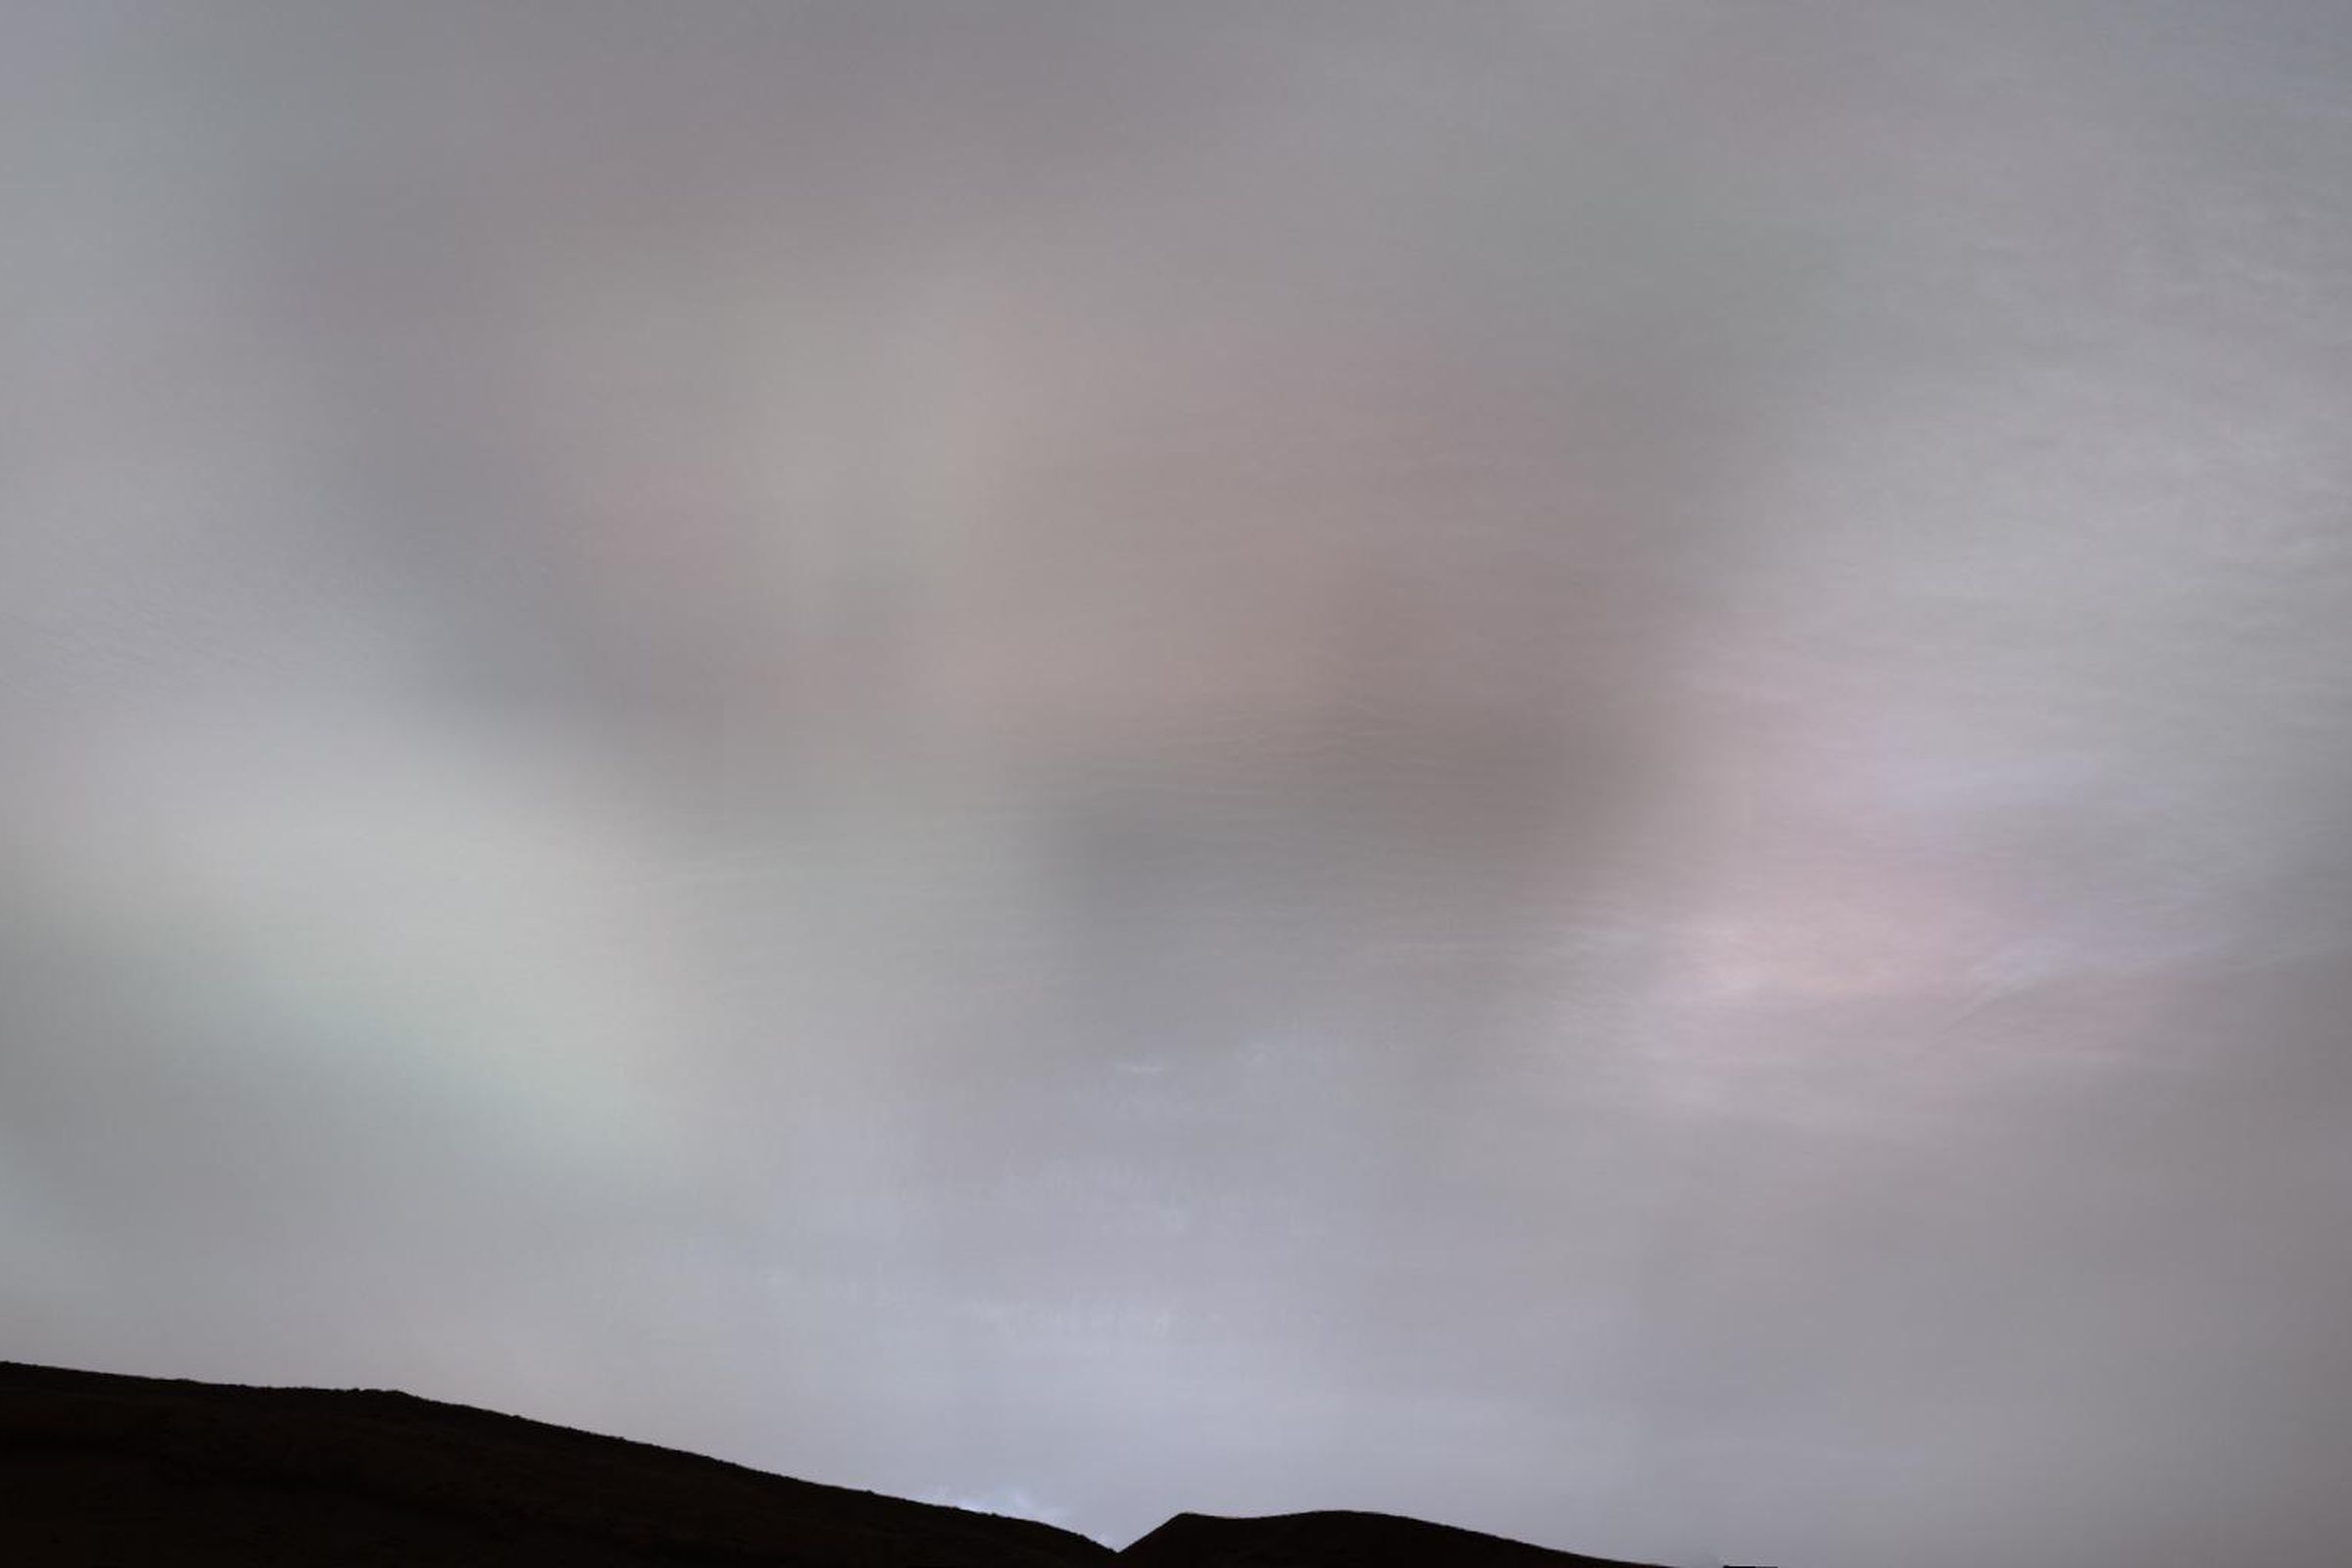 A sunset on Mars, as captured by the Curiosity rover